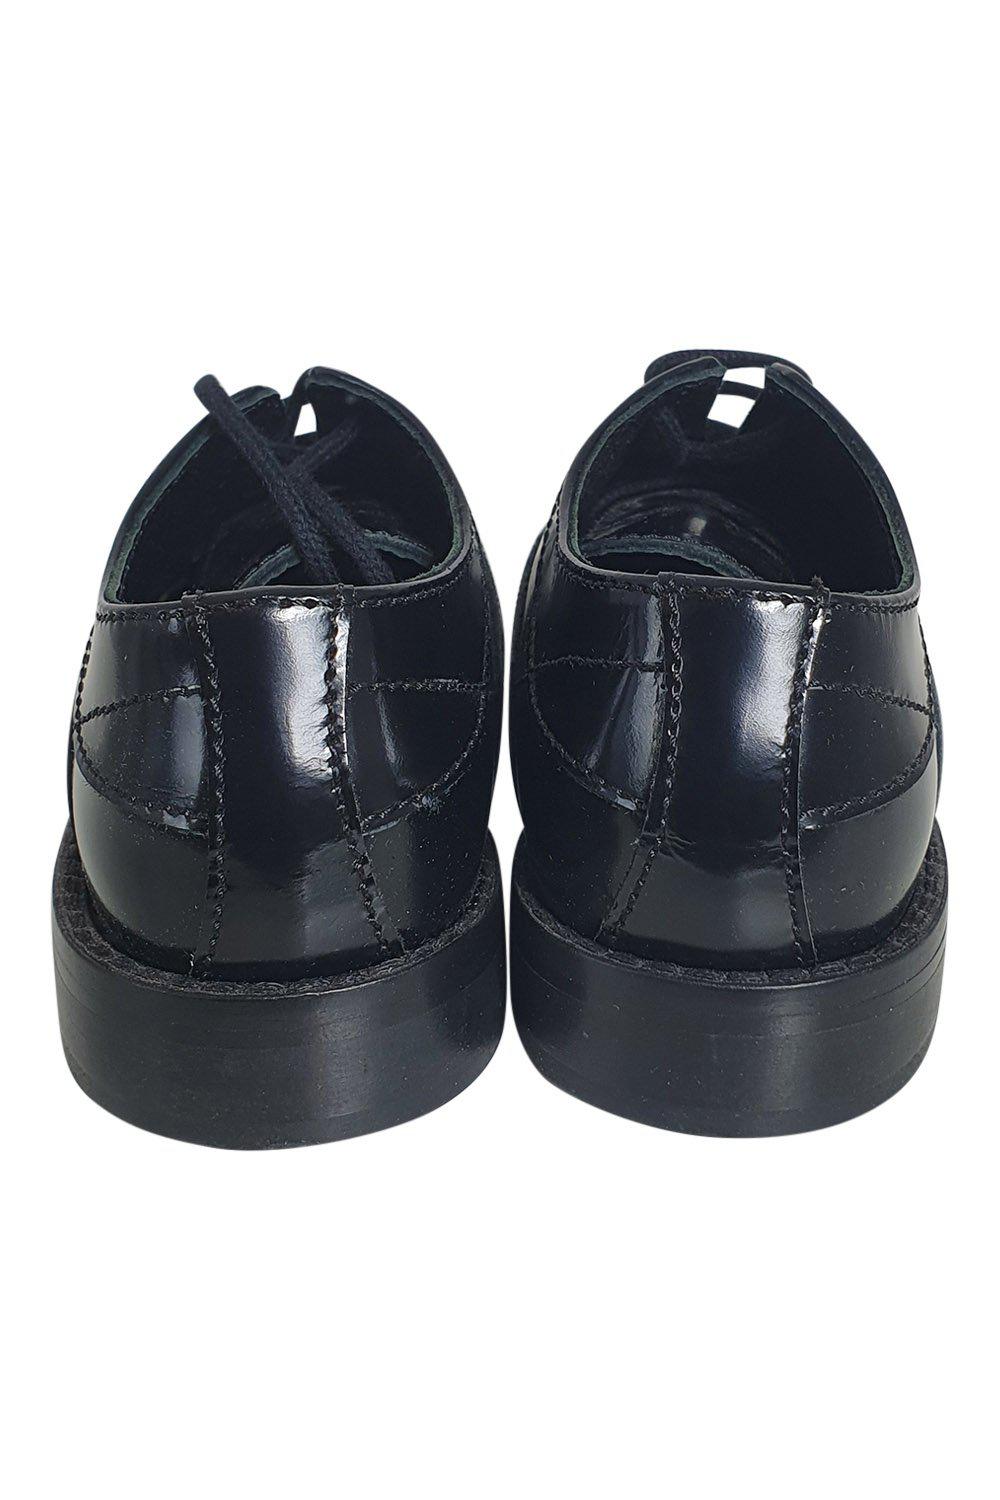 FENDI Kids Black Leather Lace Up Dress Shoes (26)-The Freperie